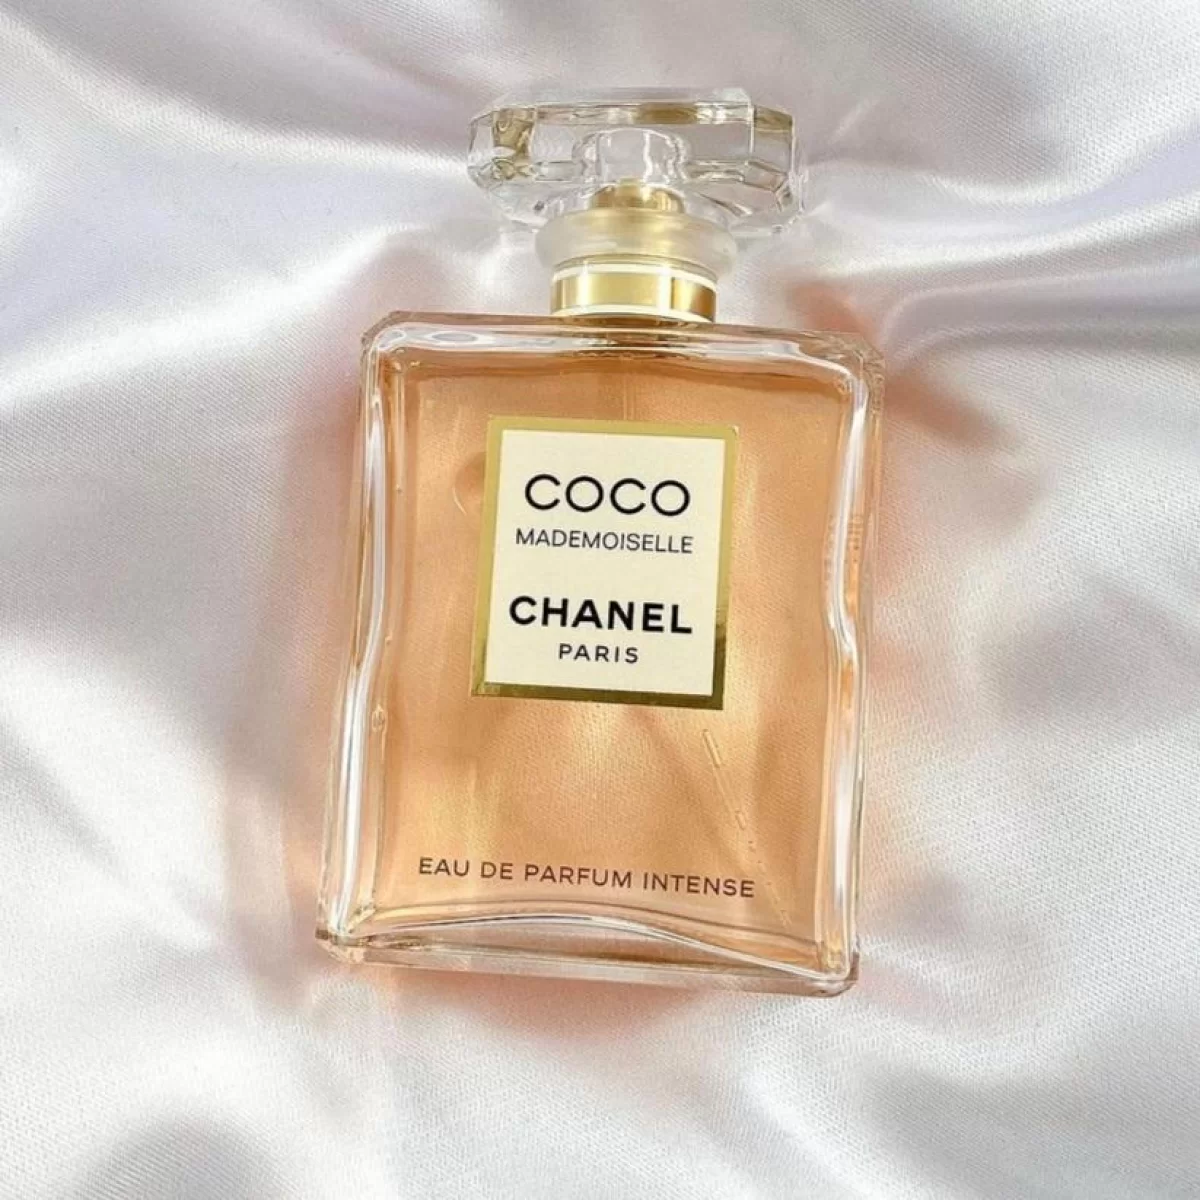 Coco Mademoiselle 55 ml ОАЭ. Luxe collection Chanel Coco Mademoiselle 55 мл. Luxe collection Chanel Coco Mademoiselle 55 мл Дубай. Парфюм мадмуазель Пьюр Фэмили.